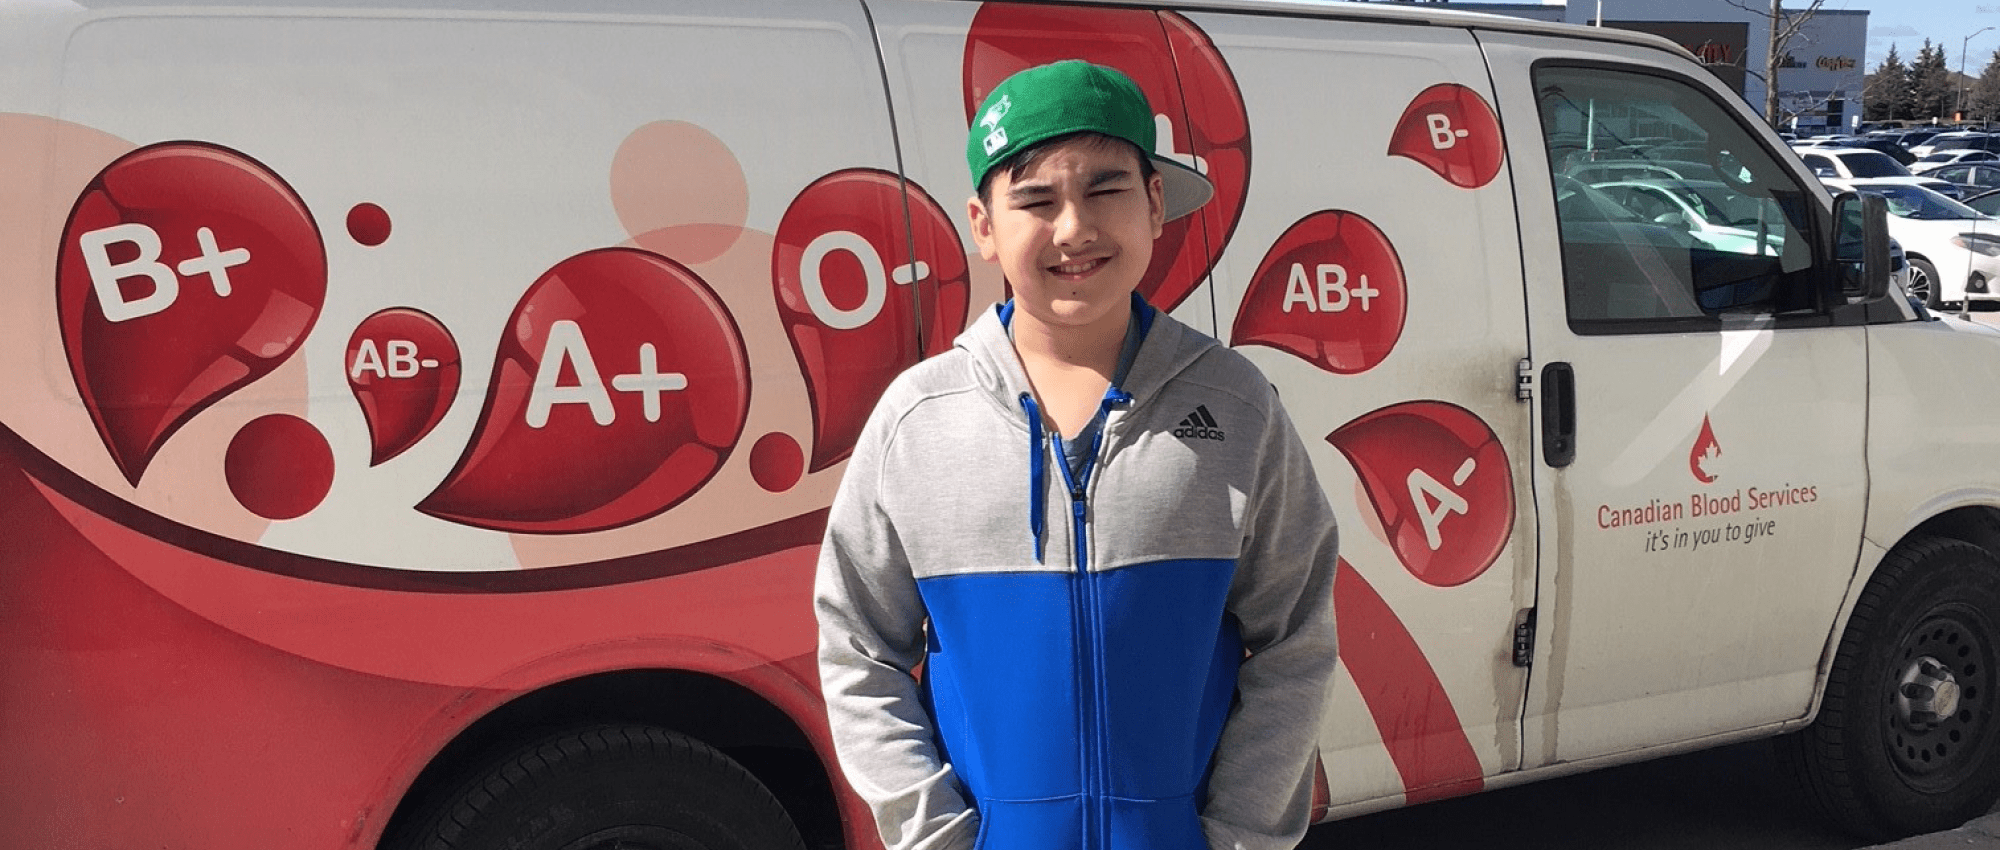 Aary with a green baseball cap standing in front of a Canadian Blood Services van outside